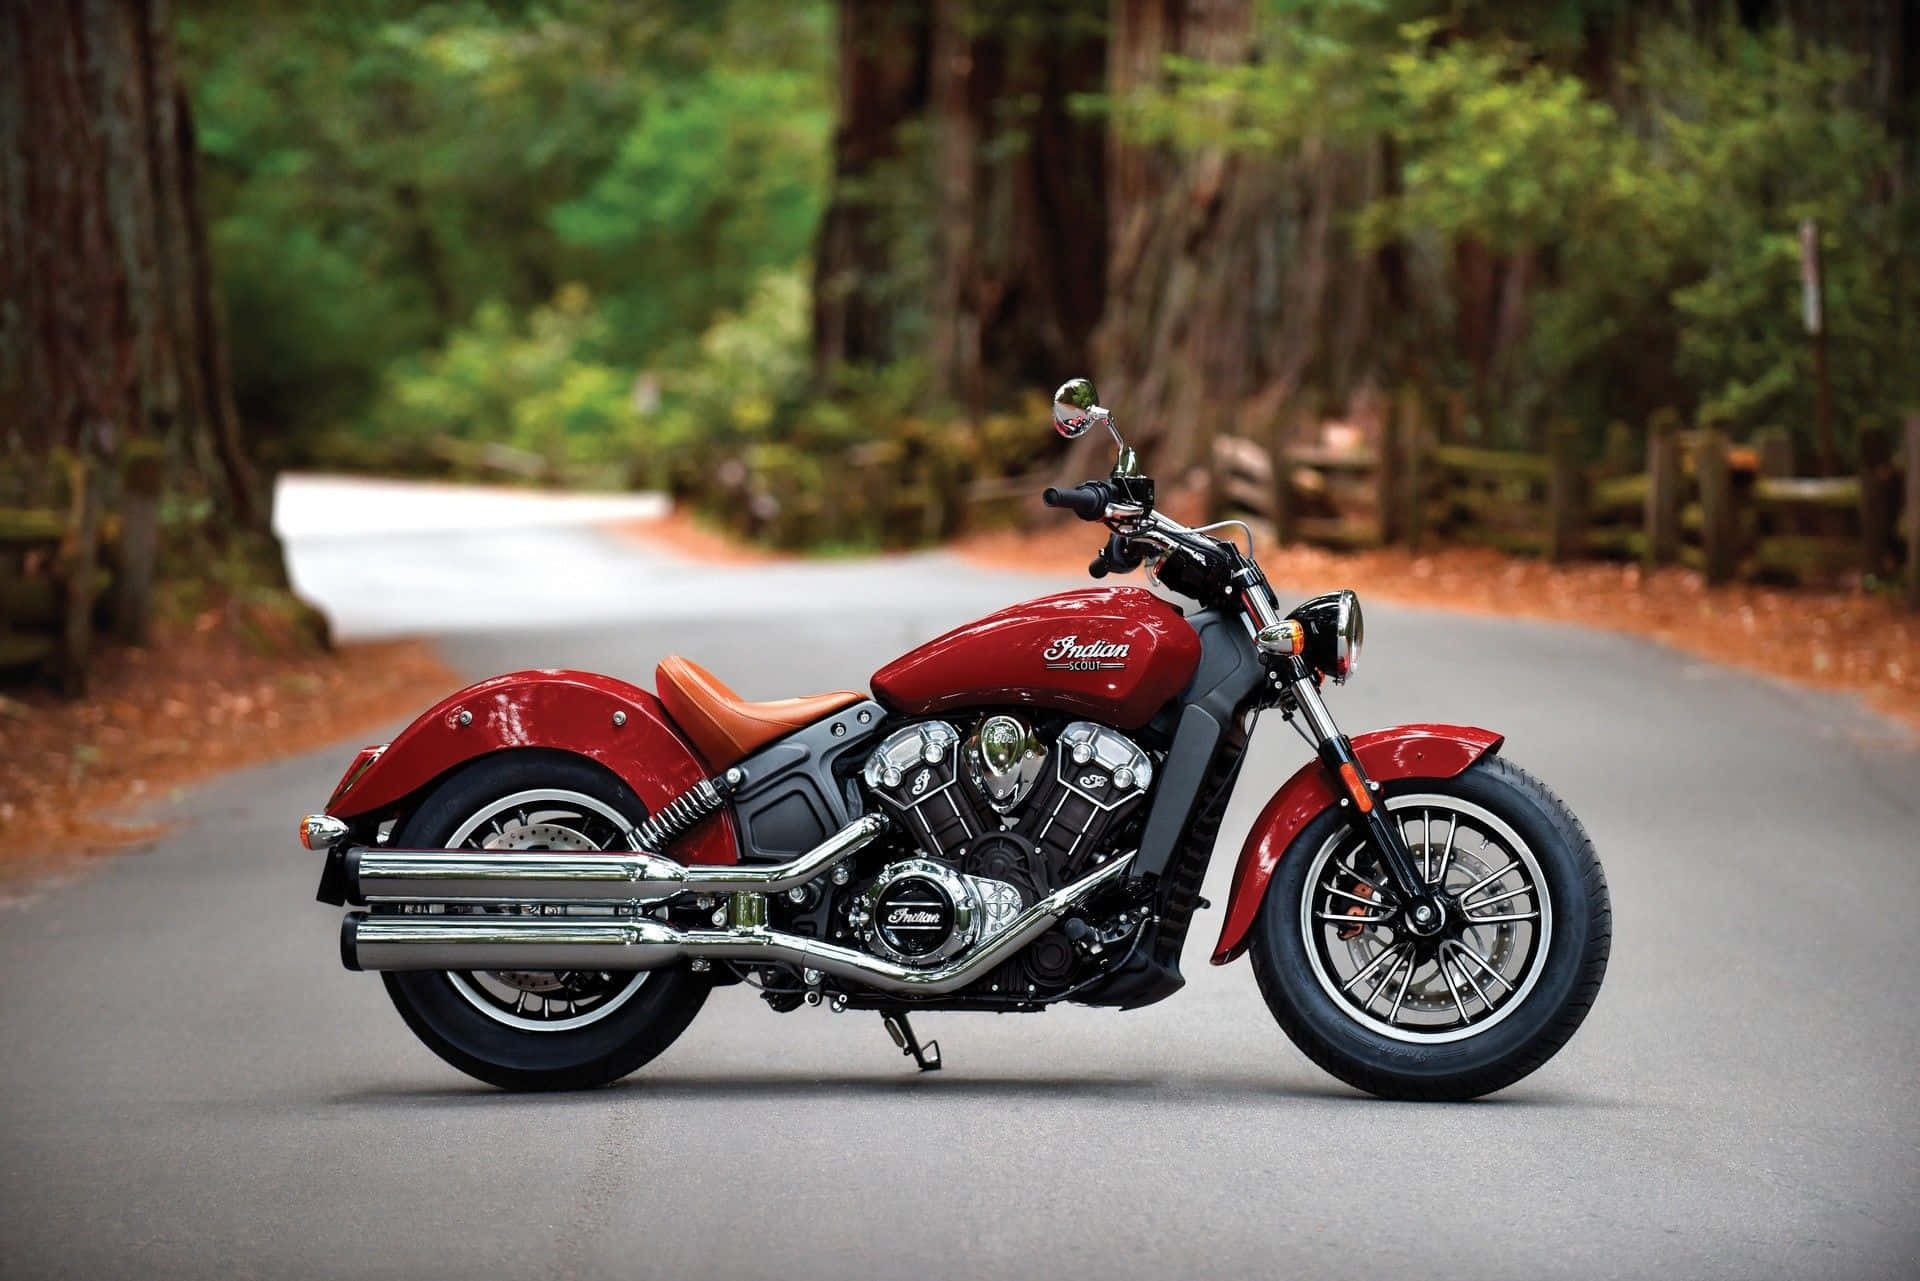 Iconic Indian Motorcycle On Open Highway Wallpaper